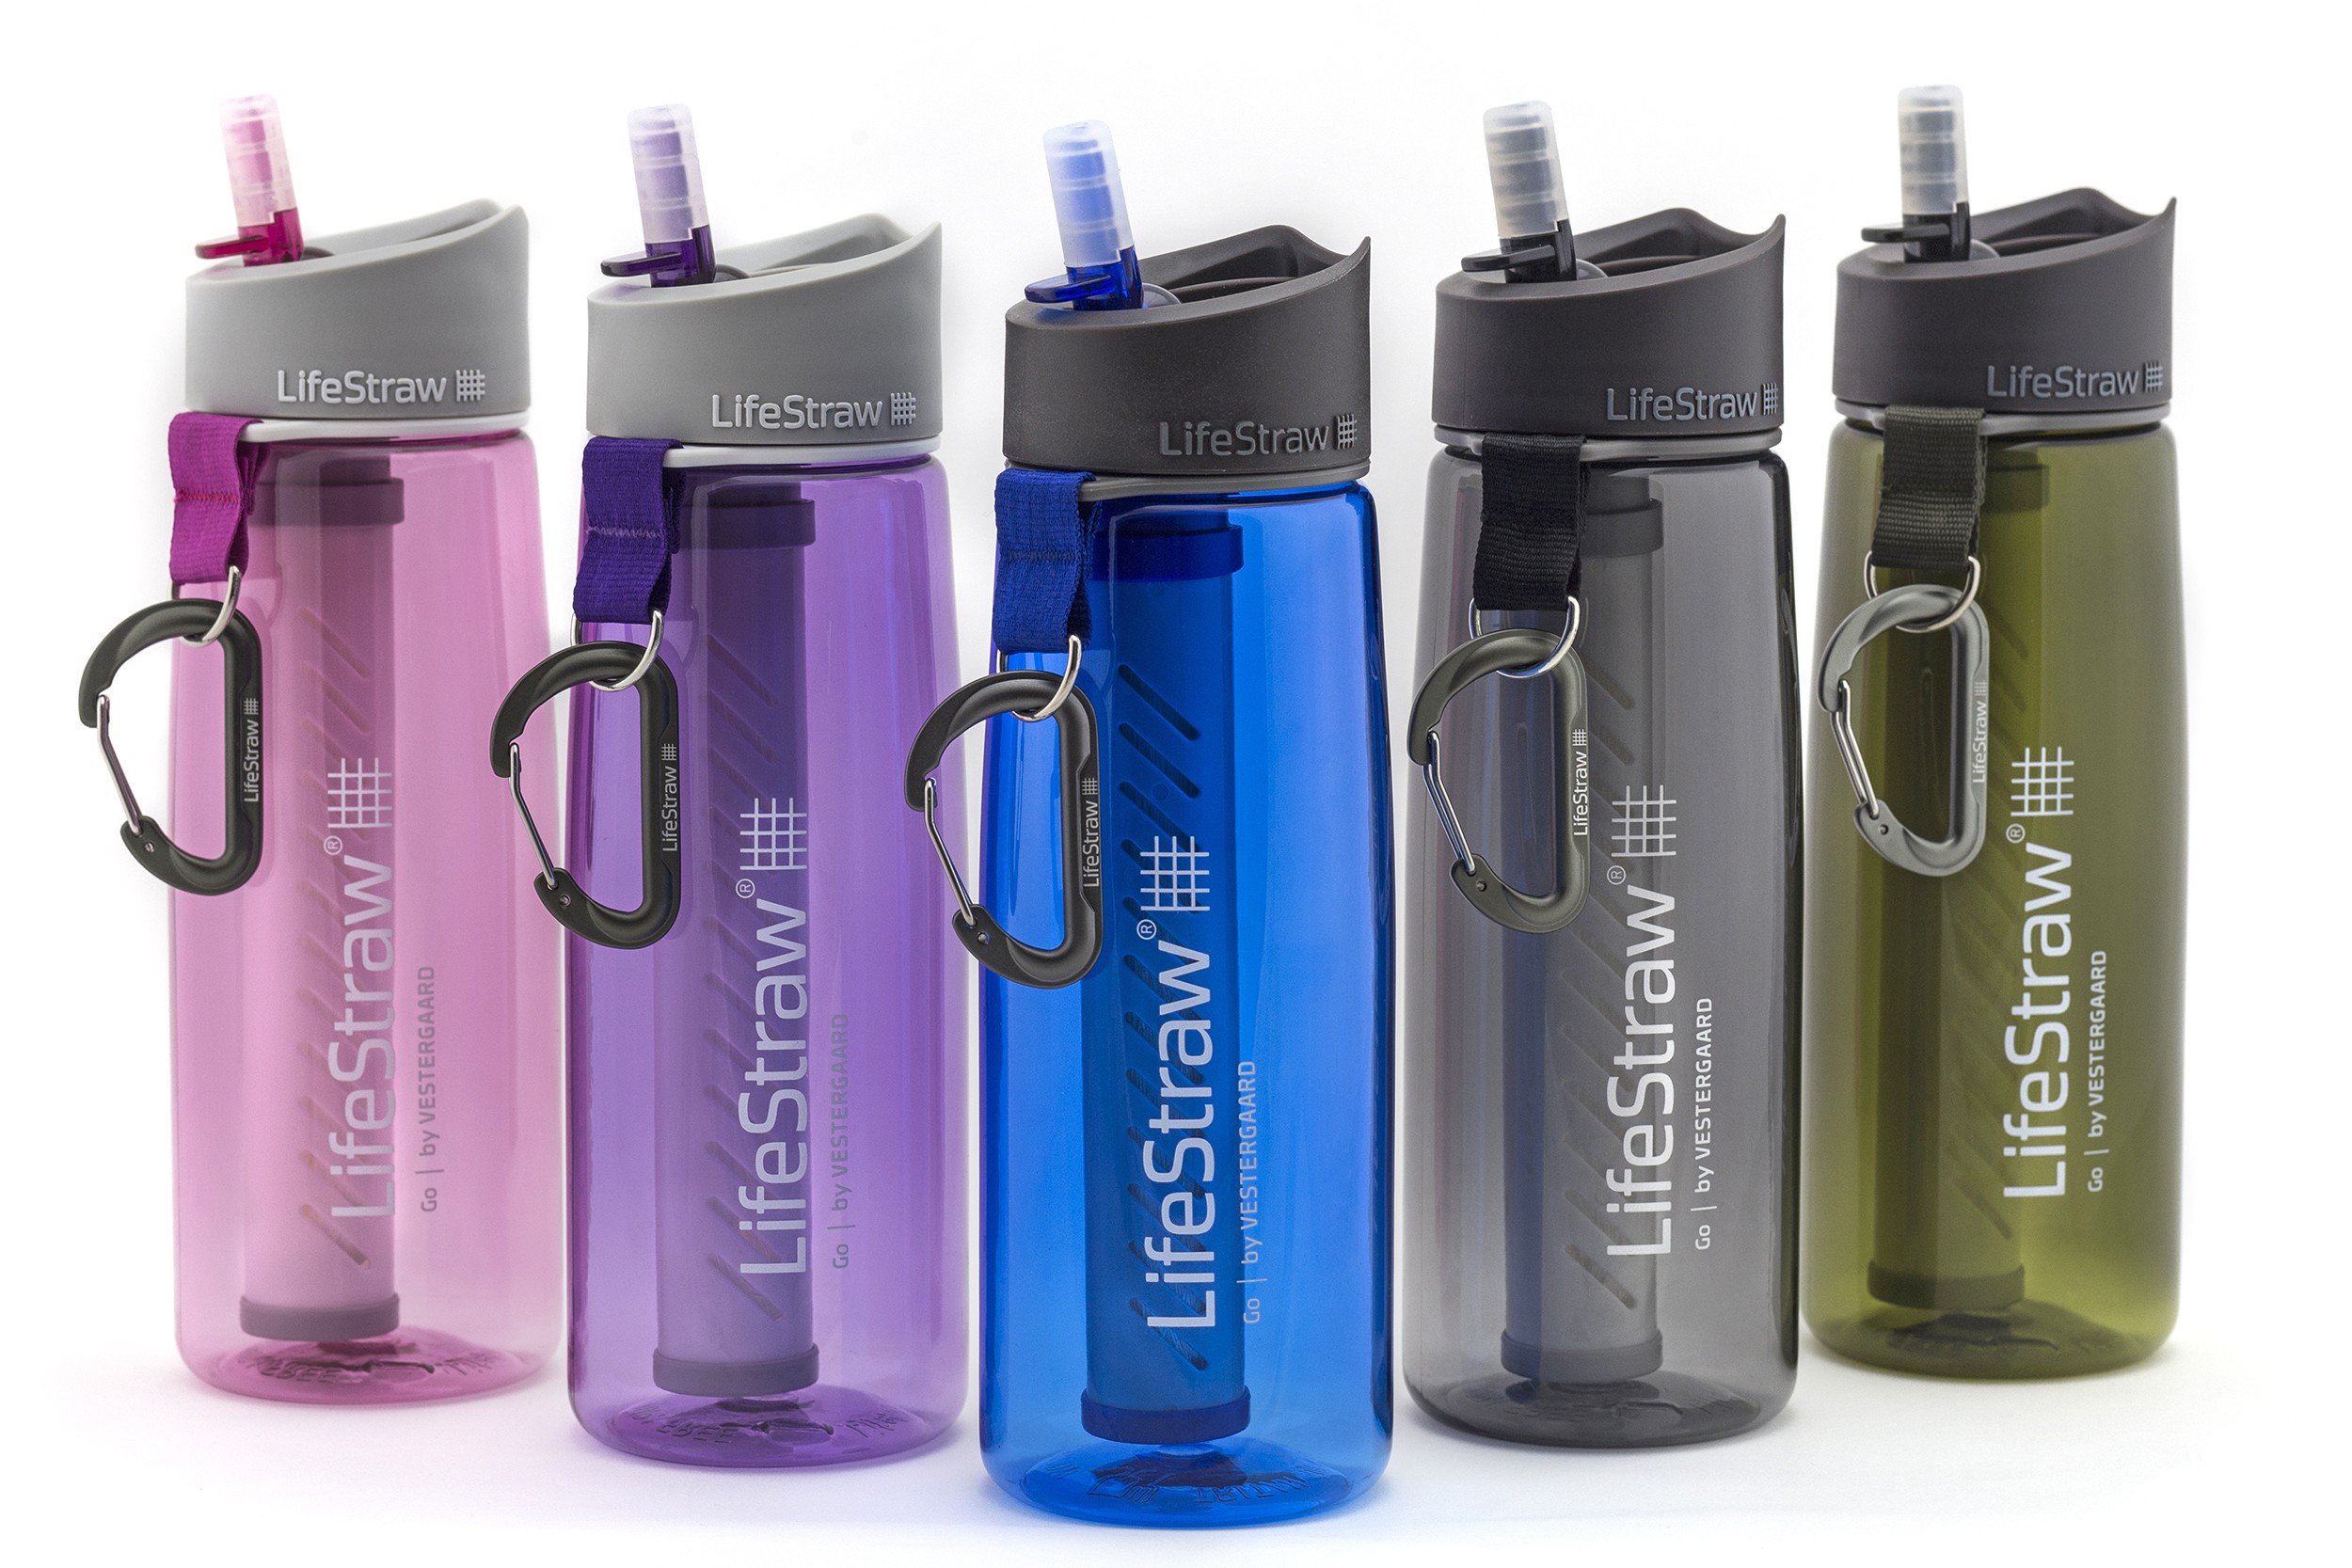 Colour BLUE LIFESTRAW GO PERSONAL PORTABLE WATER FILTER BOTTLE PURIFIER 